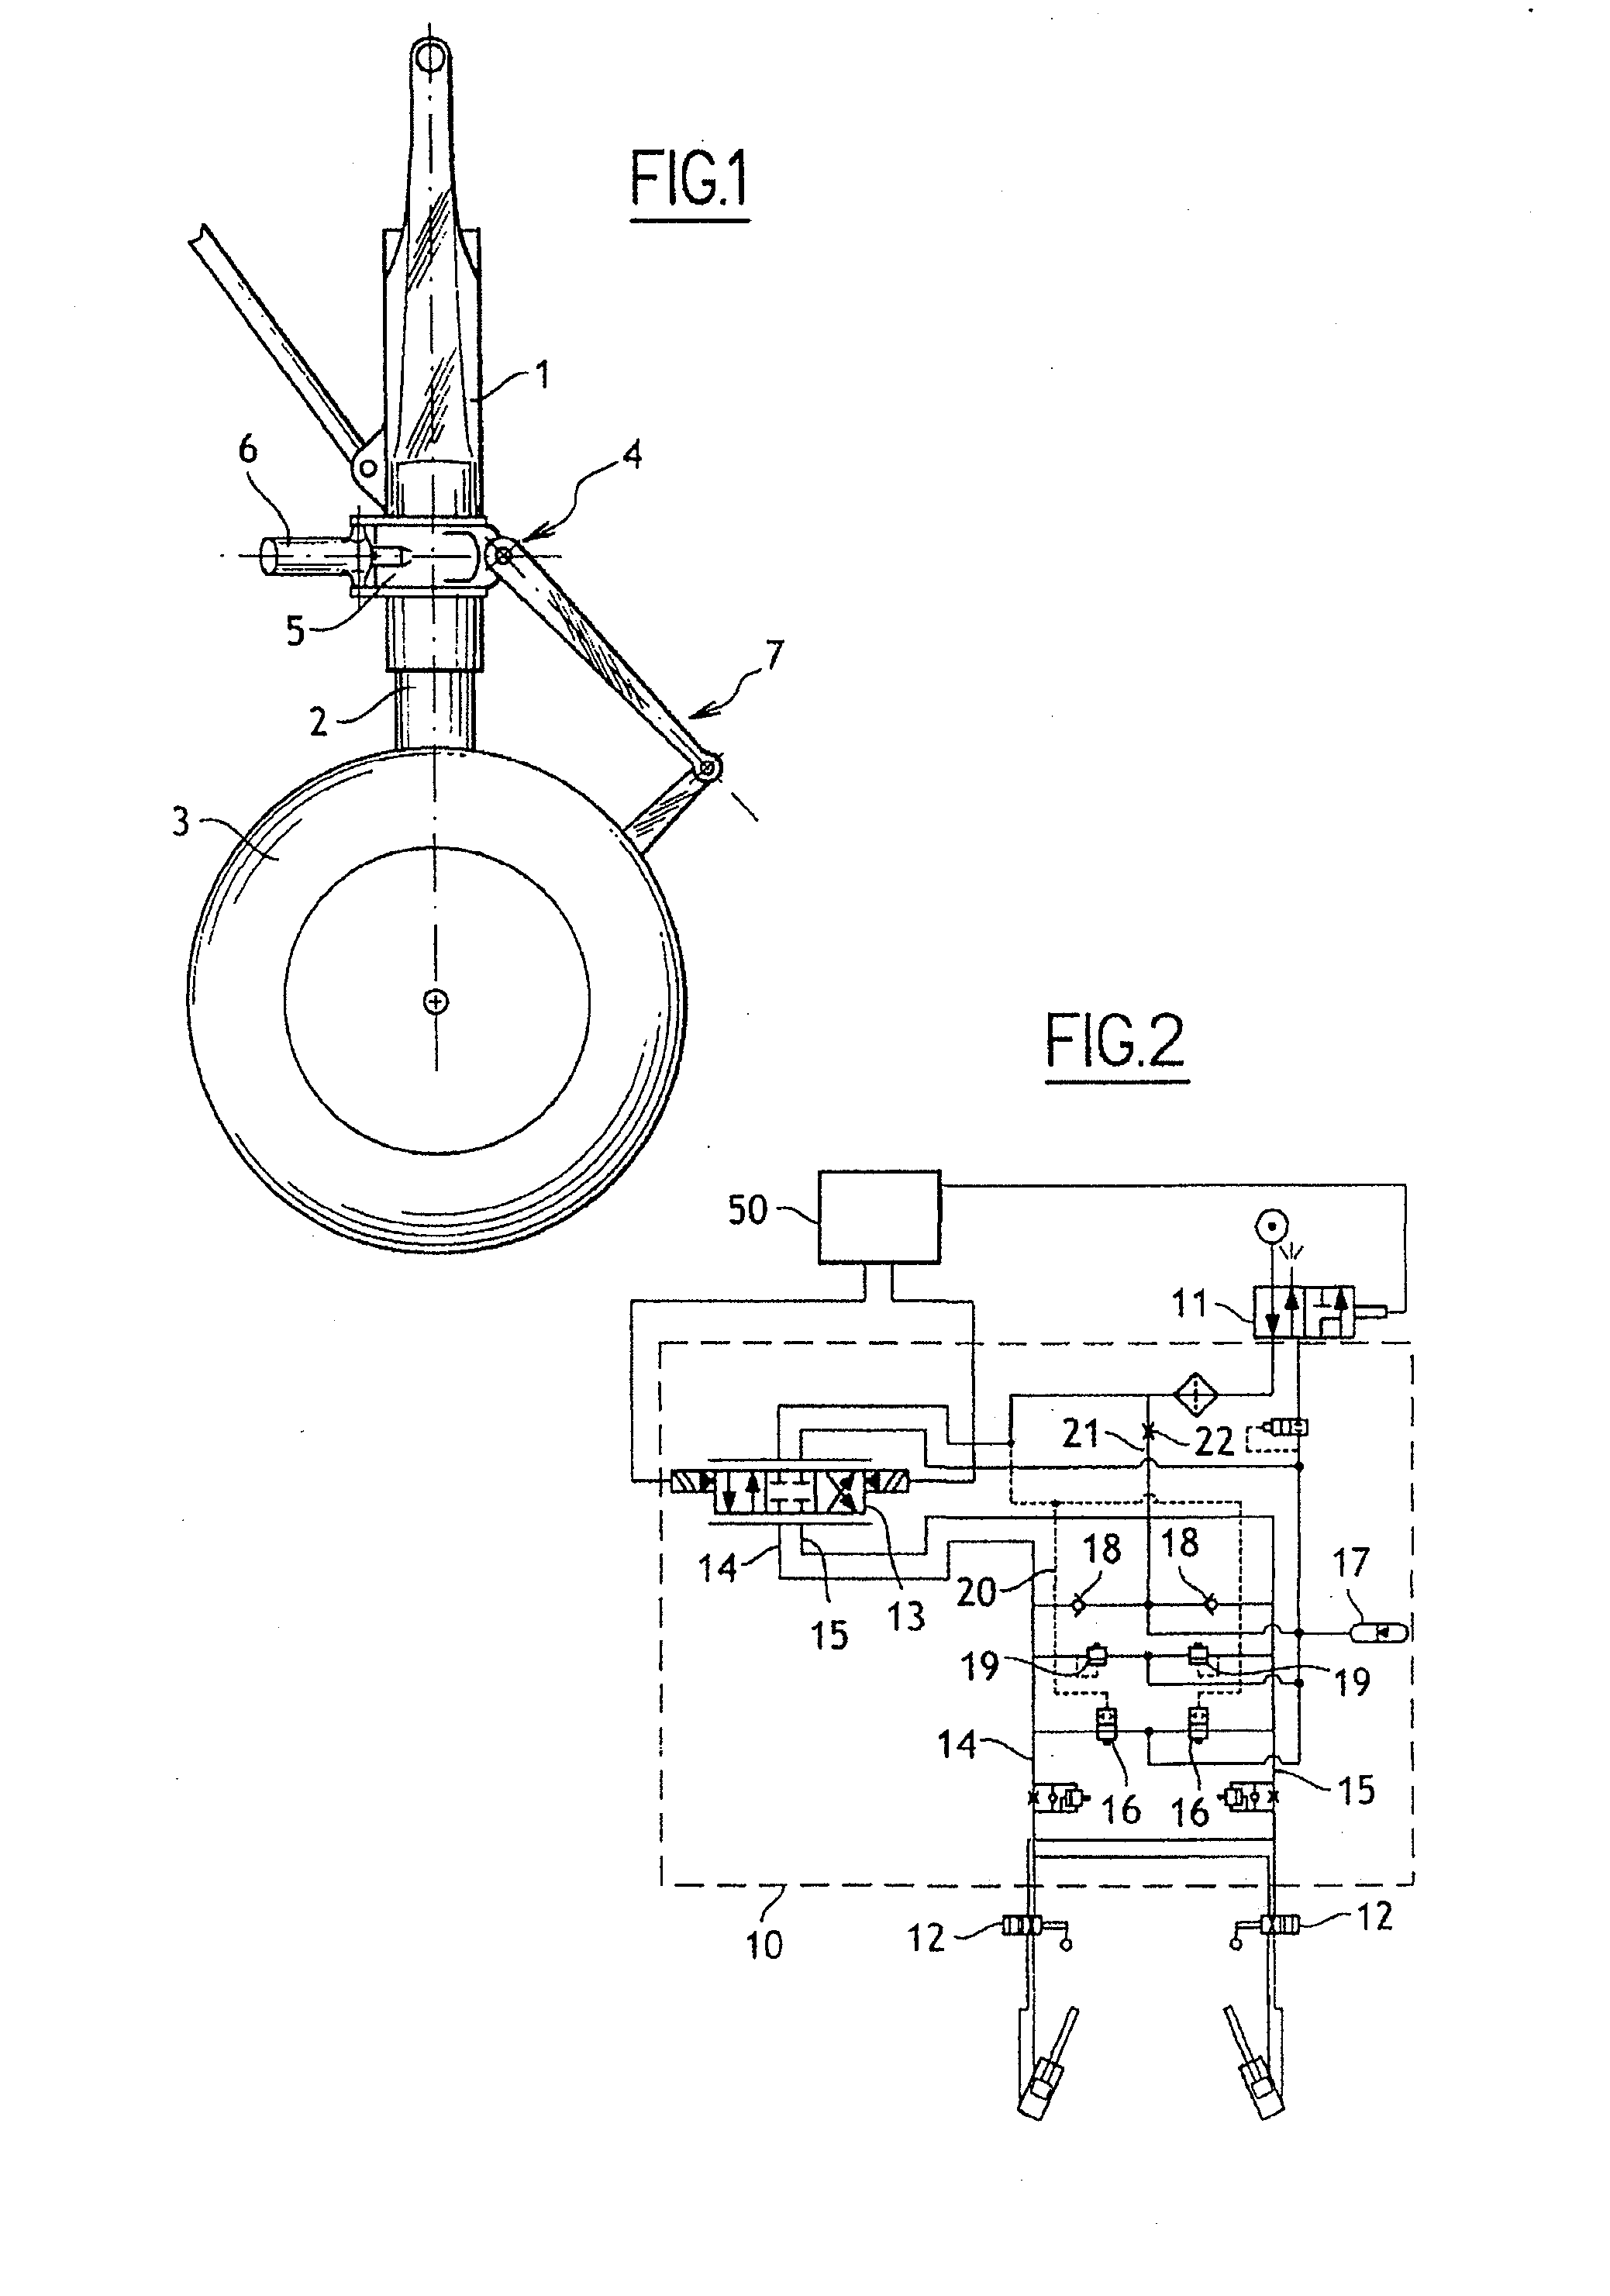 Method for managing the wheel steering control of an aircraft